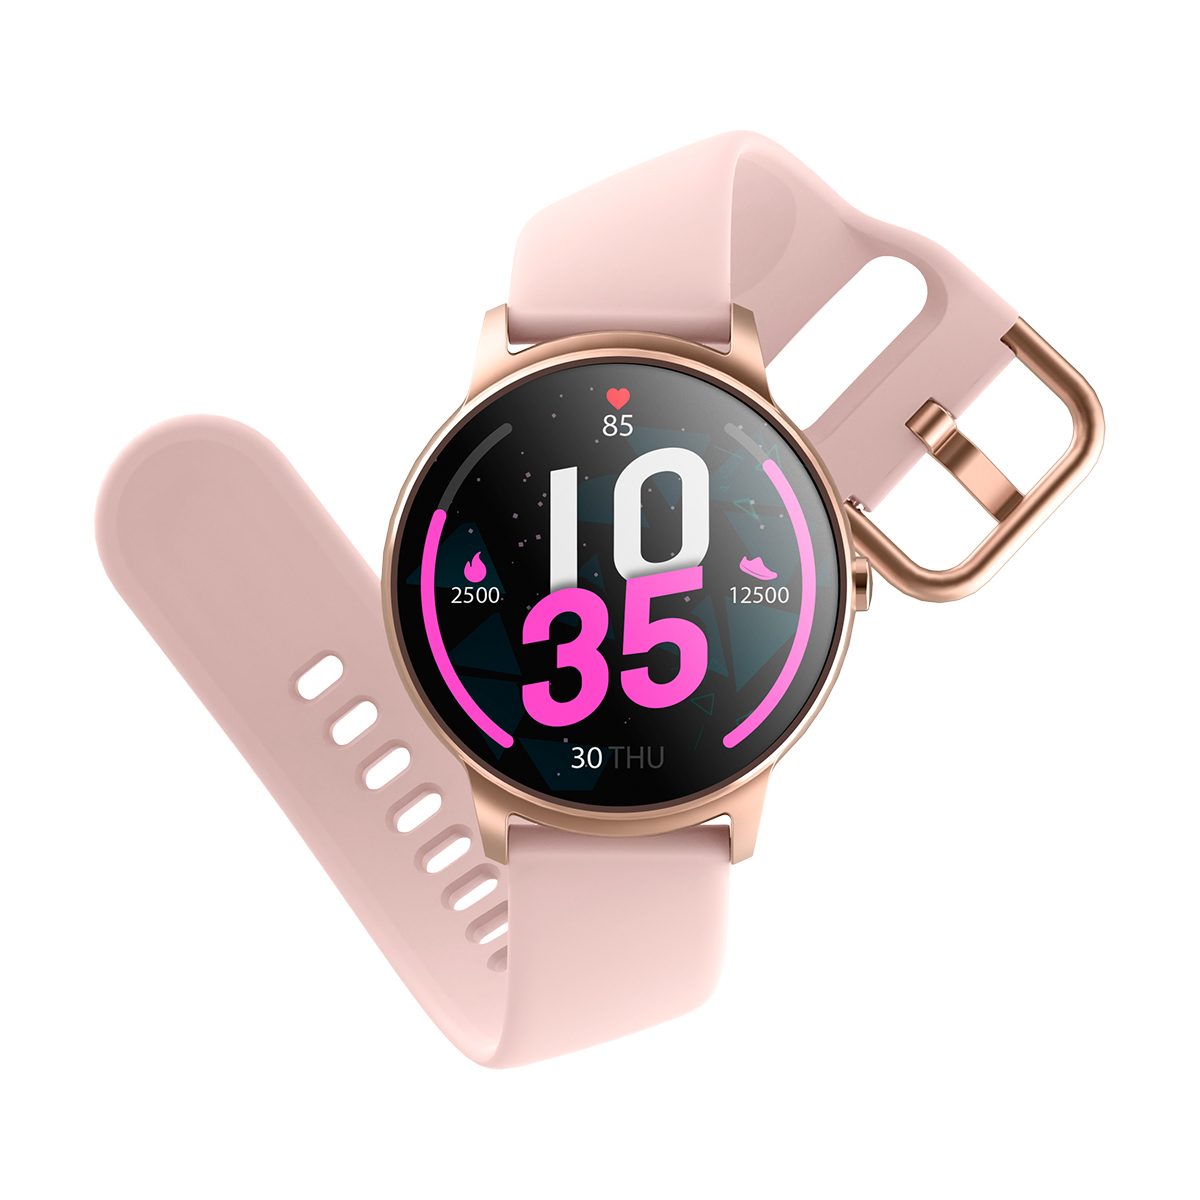 Forever smartwatch ForeVive 2 SB-330 rowe zoto / 12